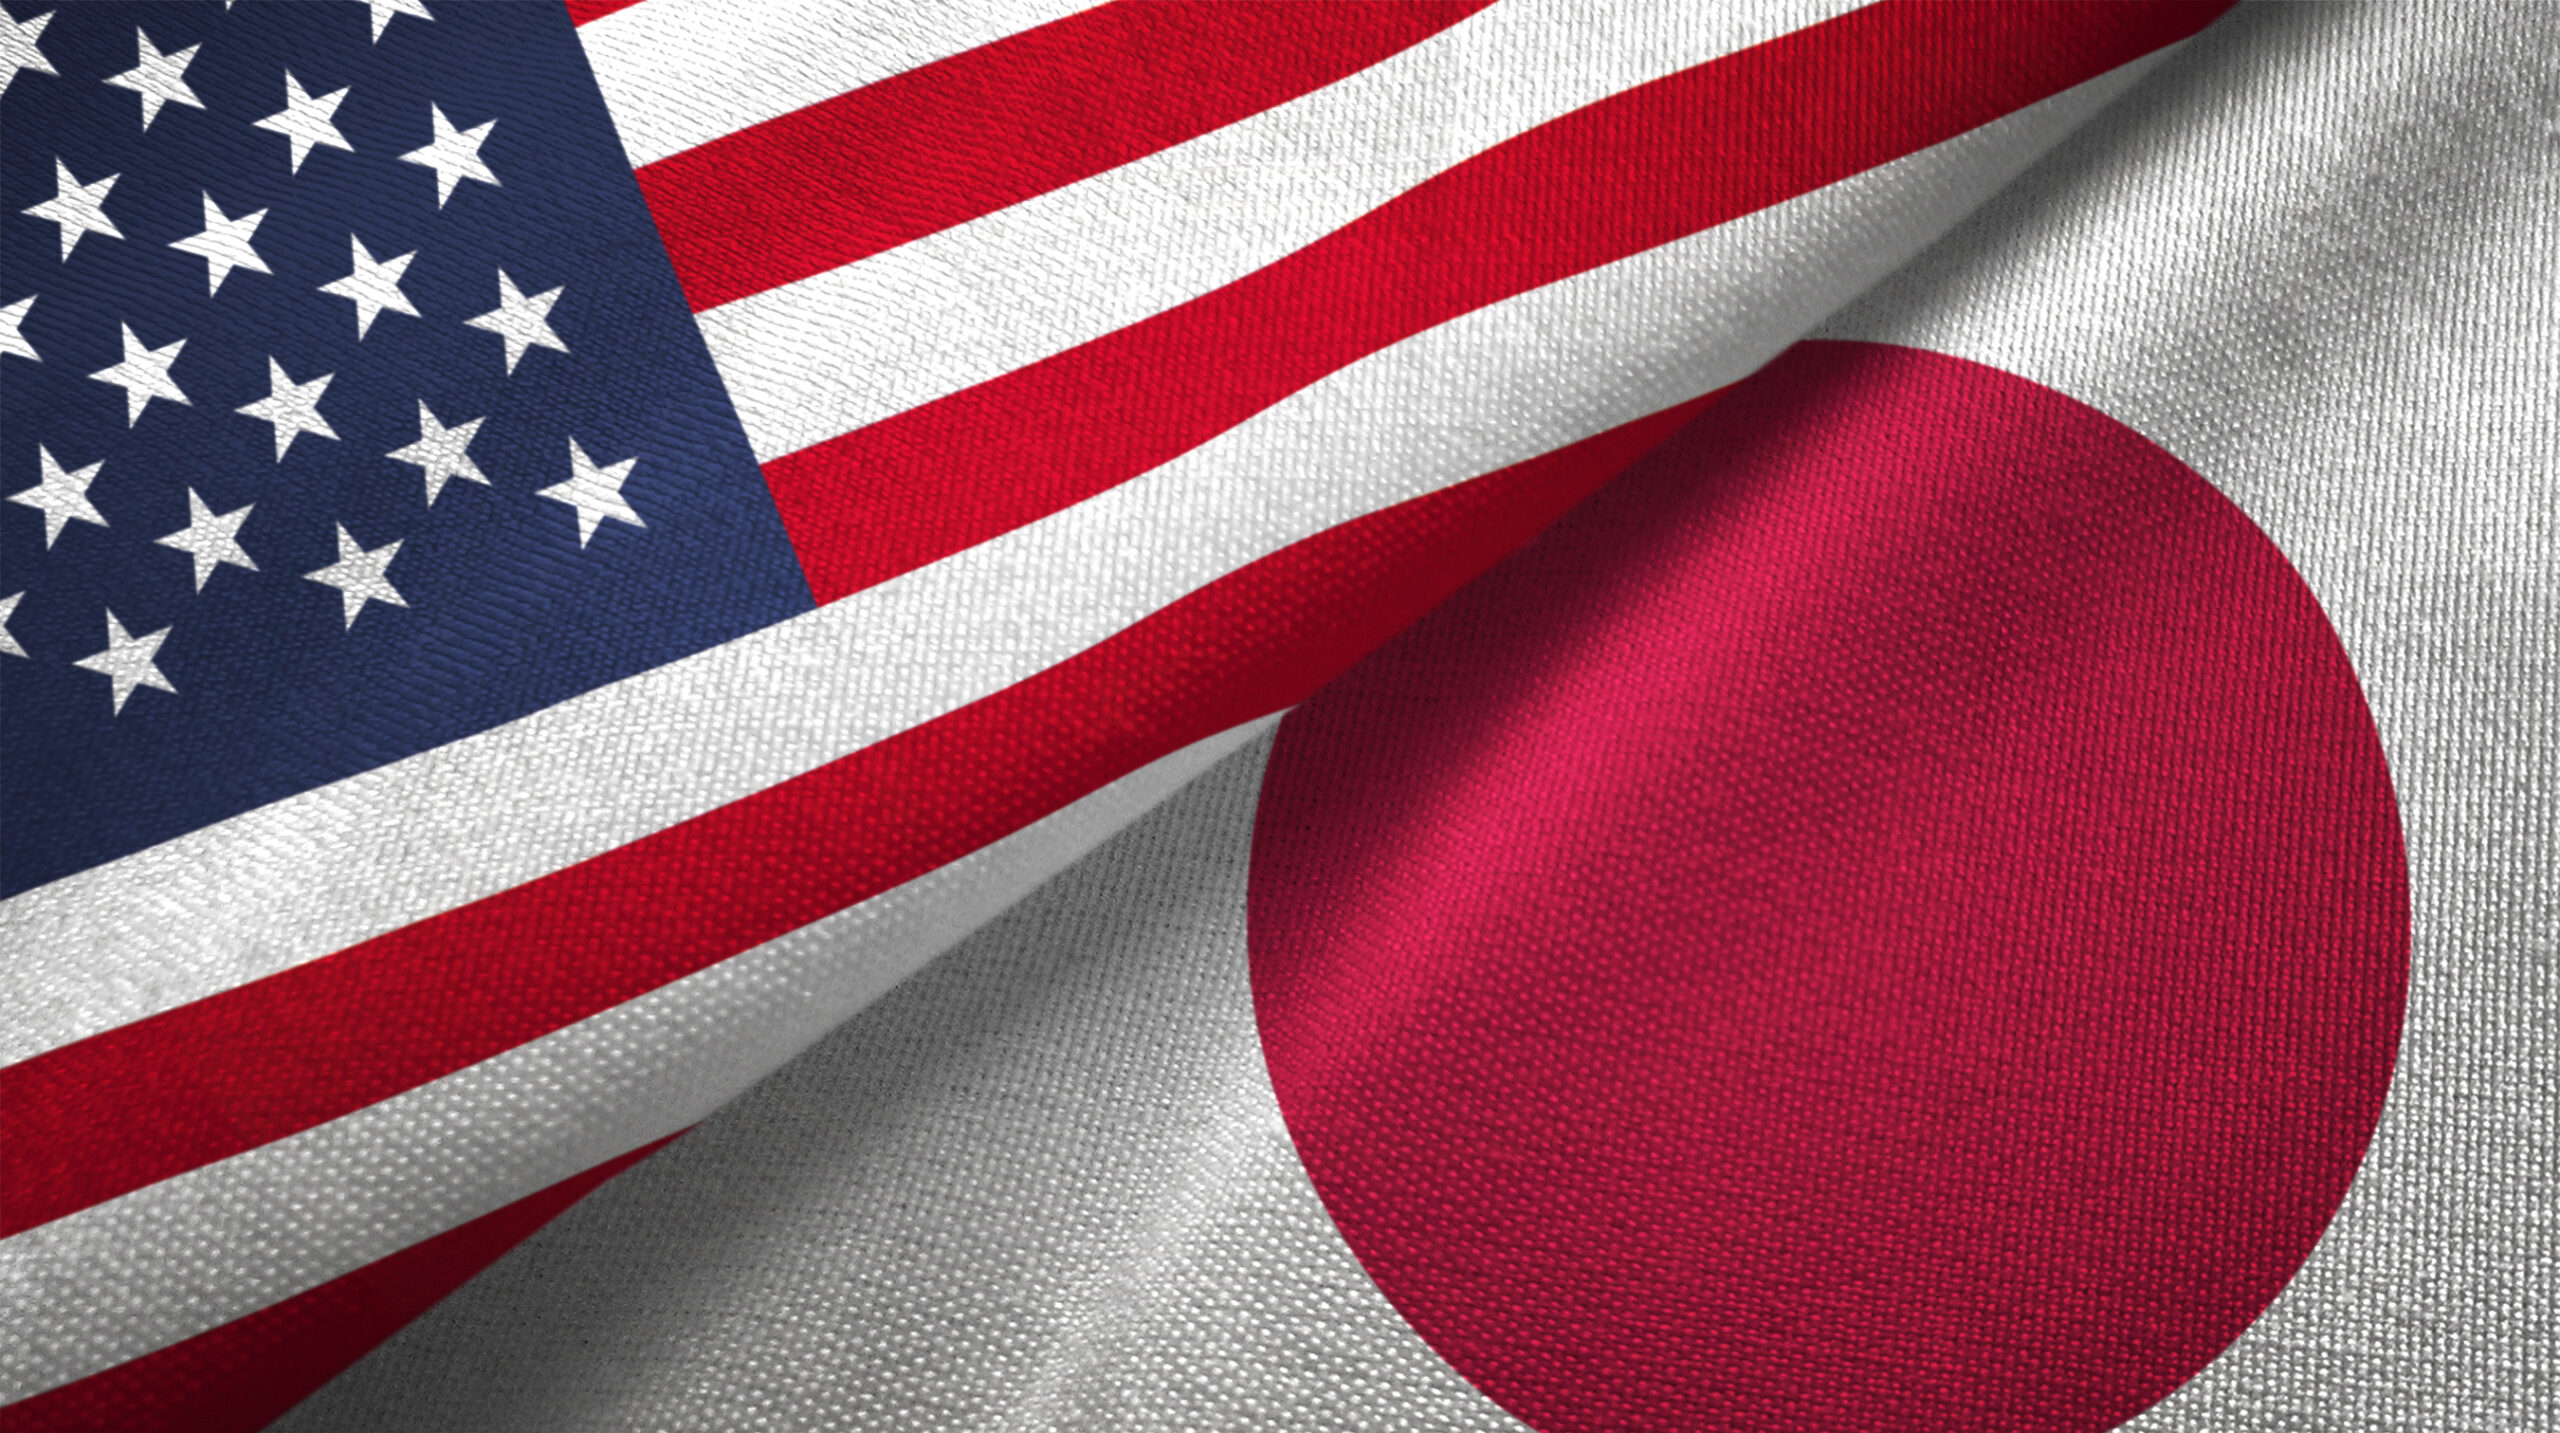 US and Japan to advocate for enhanced collaboration in AI and semiconductor fields, according to Asahi